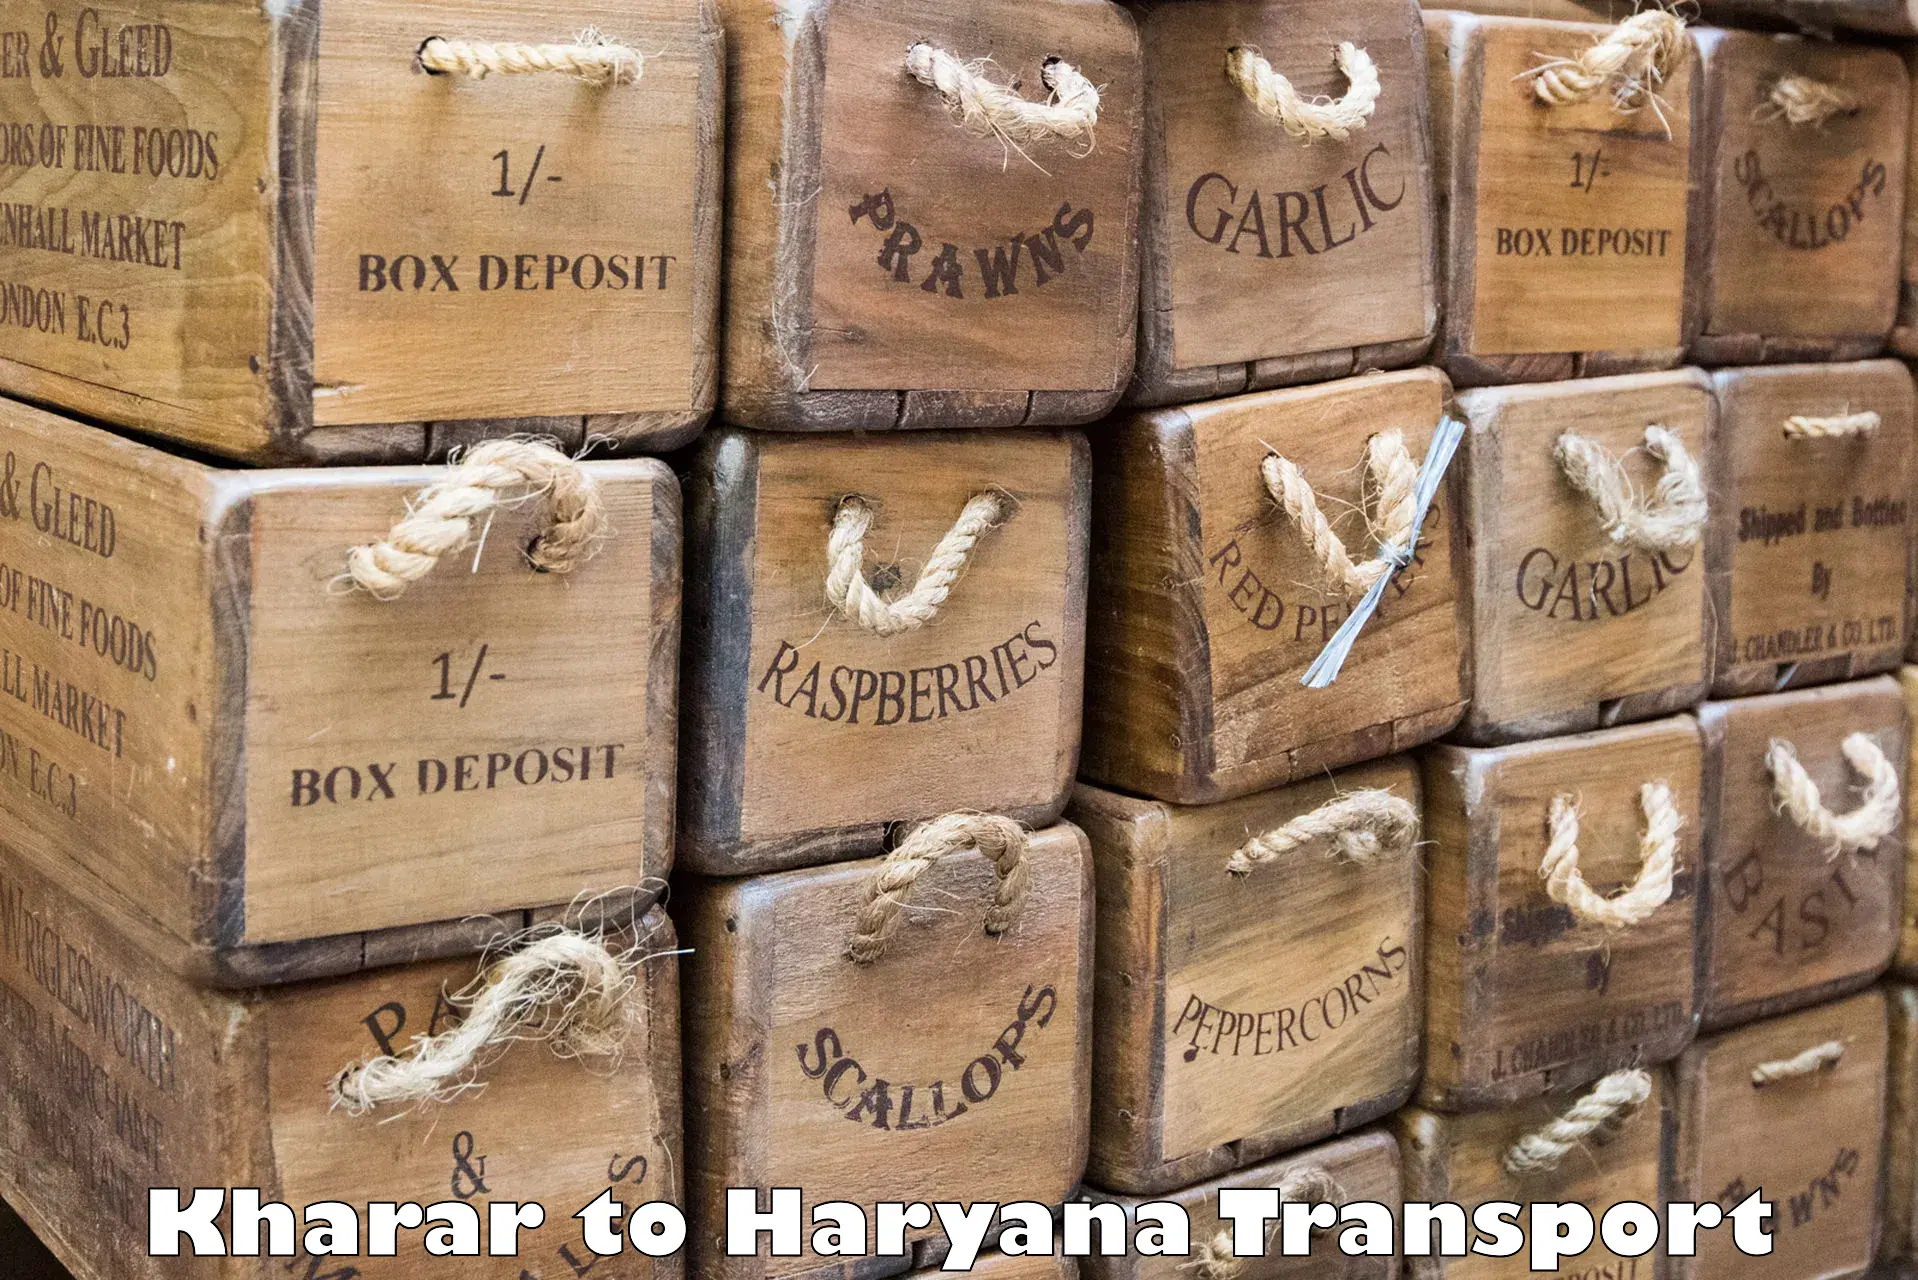 Truck transport companies in India Kharar to Odhan